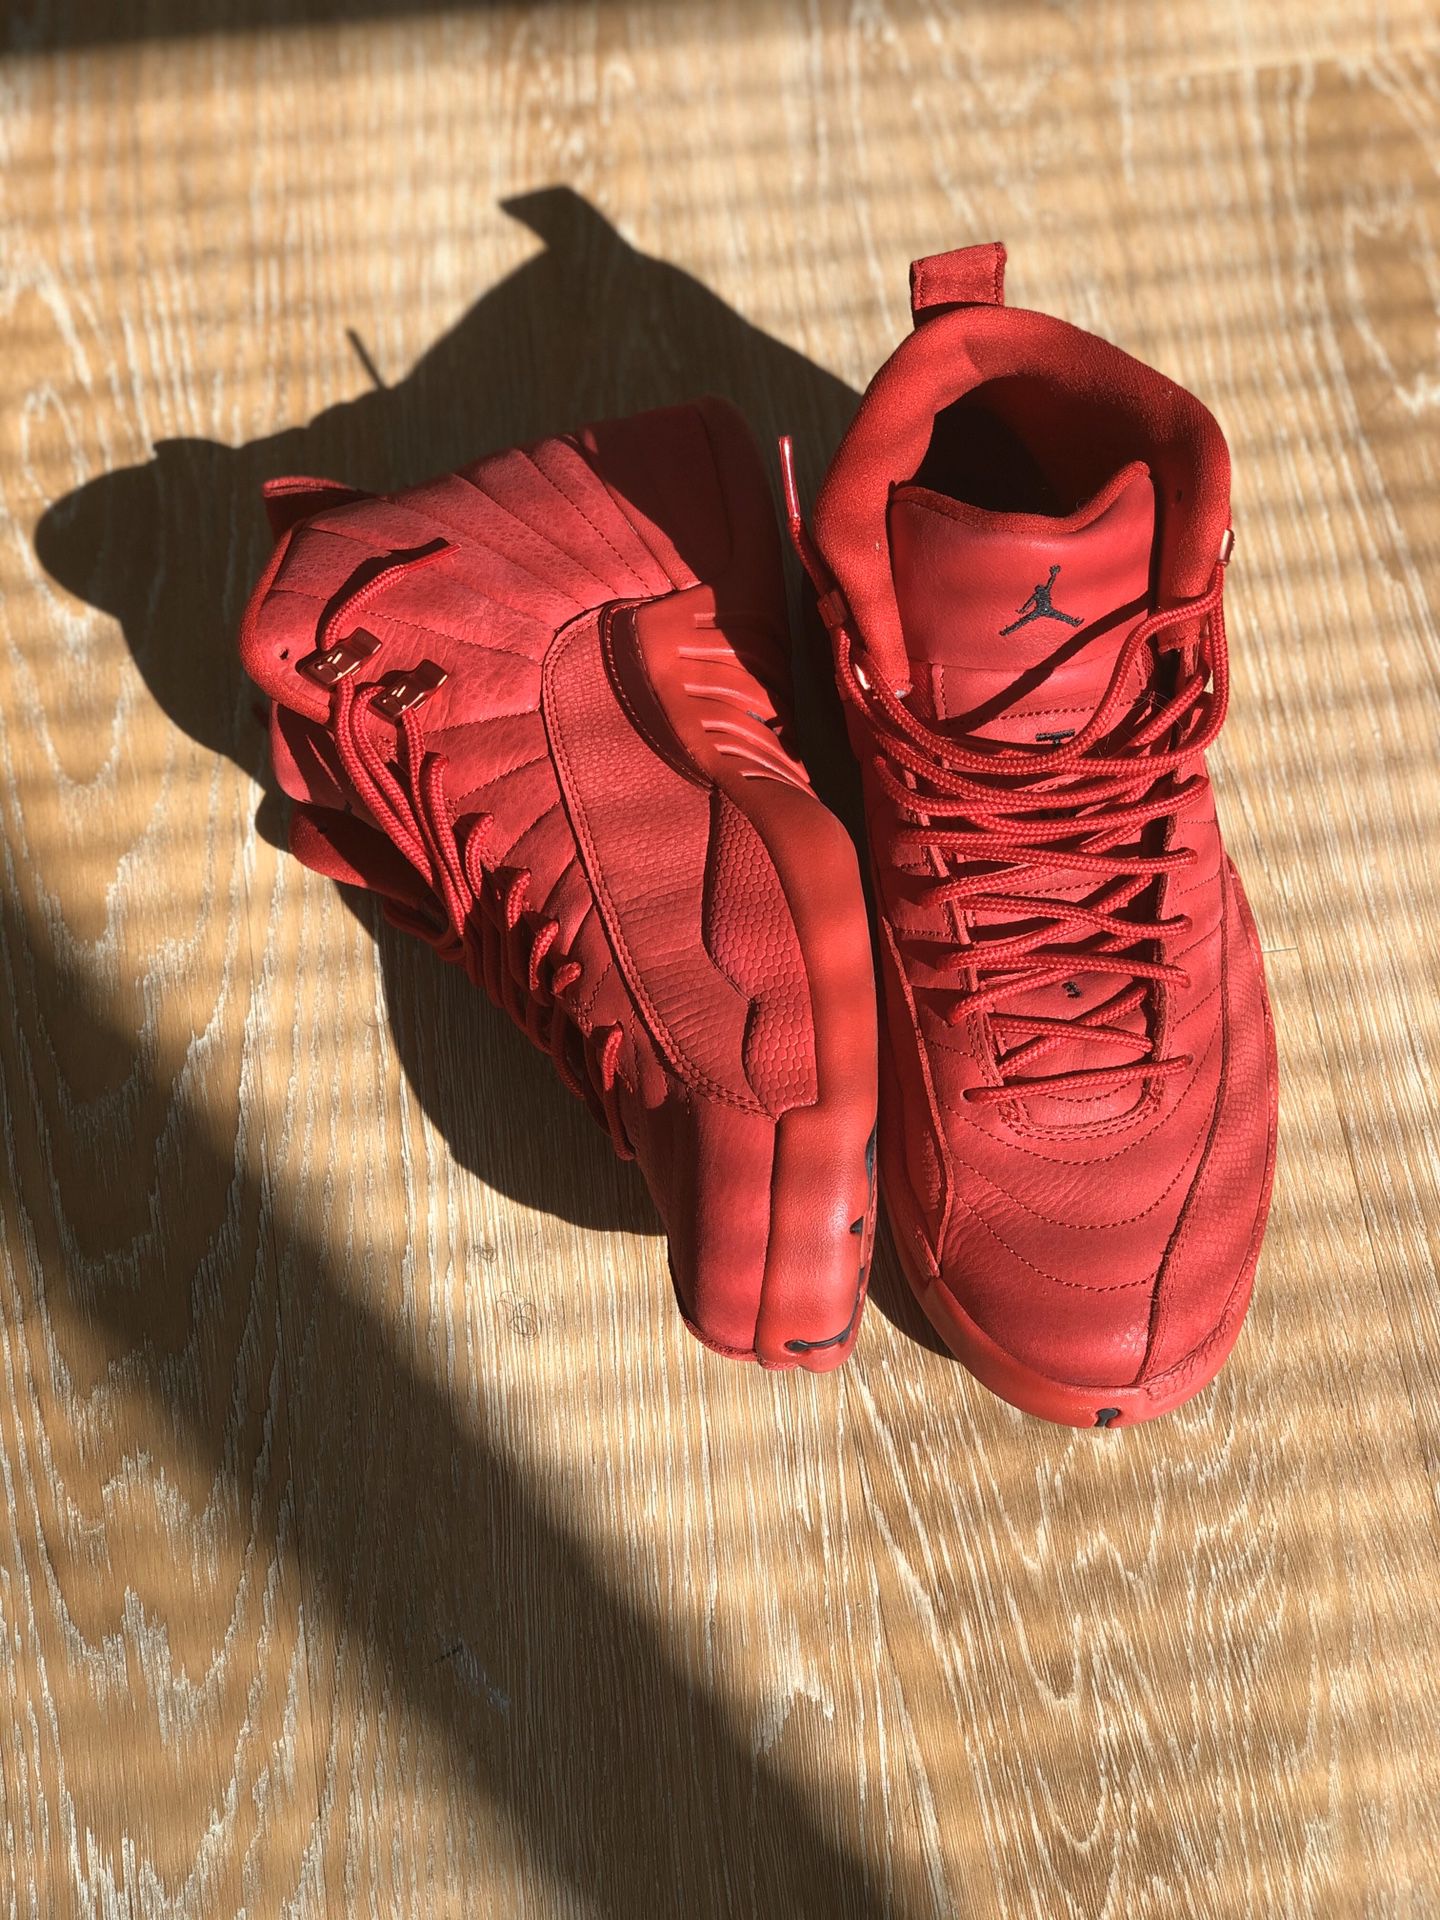 Jordan 12 Red October size 10.5 perfect condition New gym red